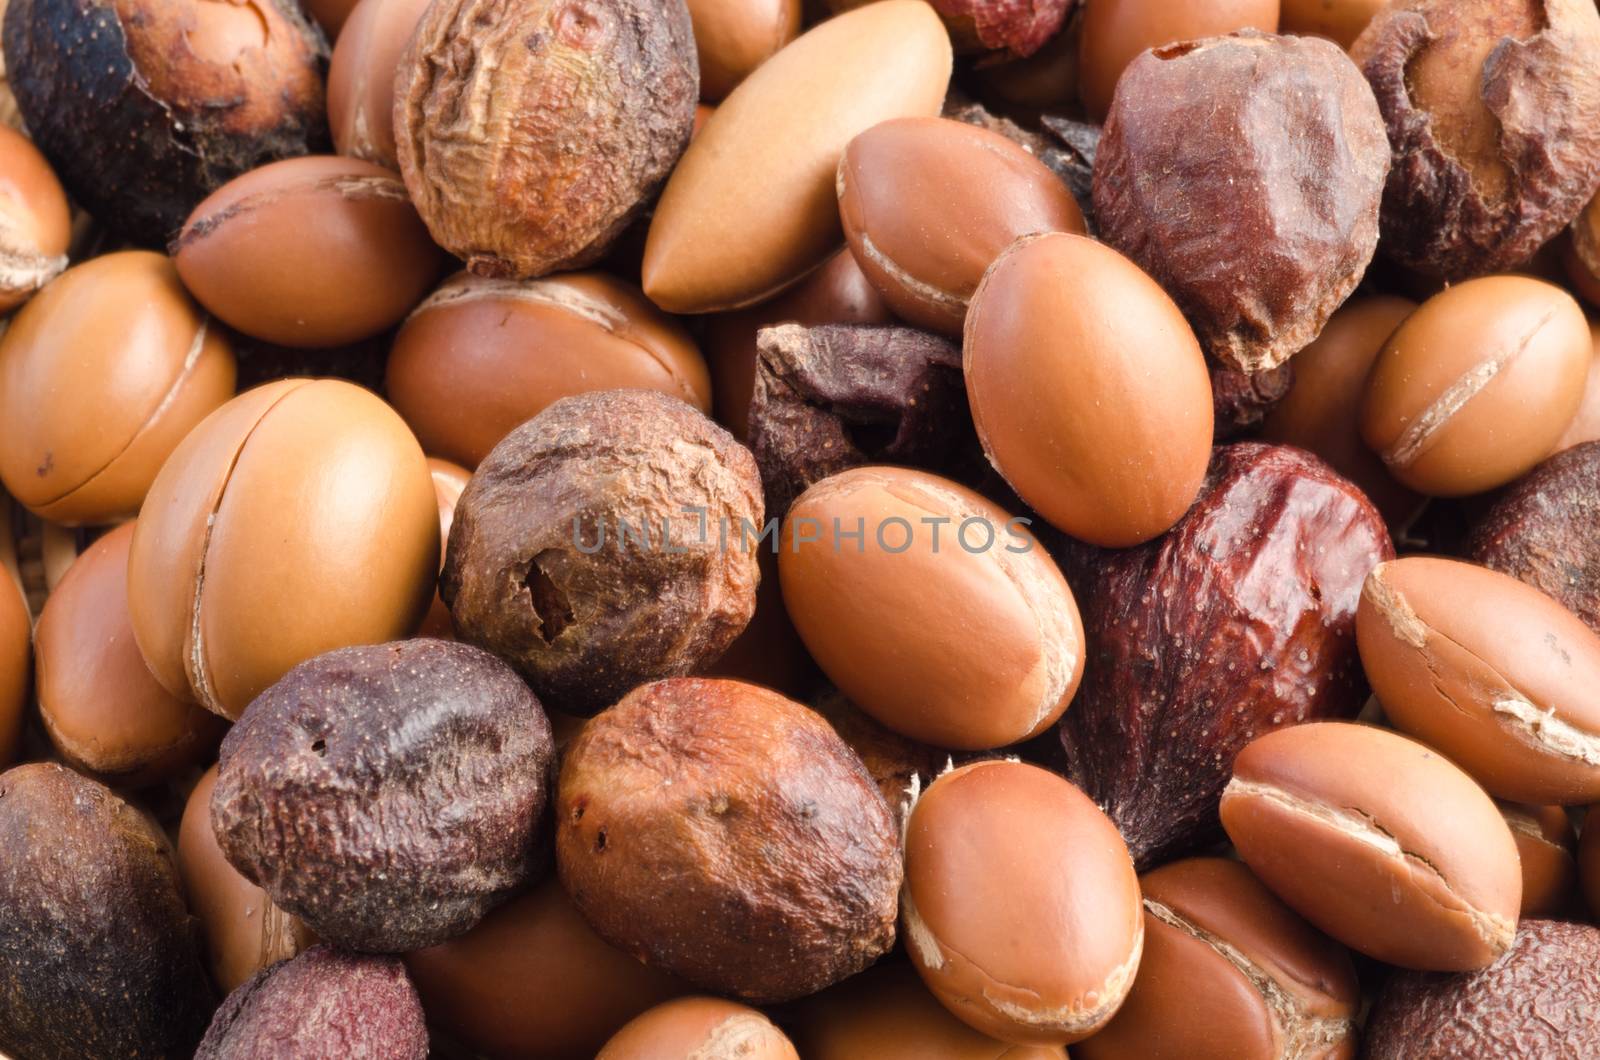 argan fruits used for cosmetic product